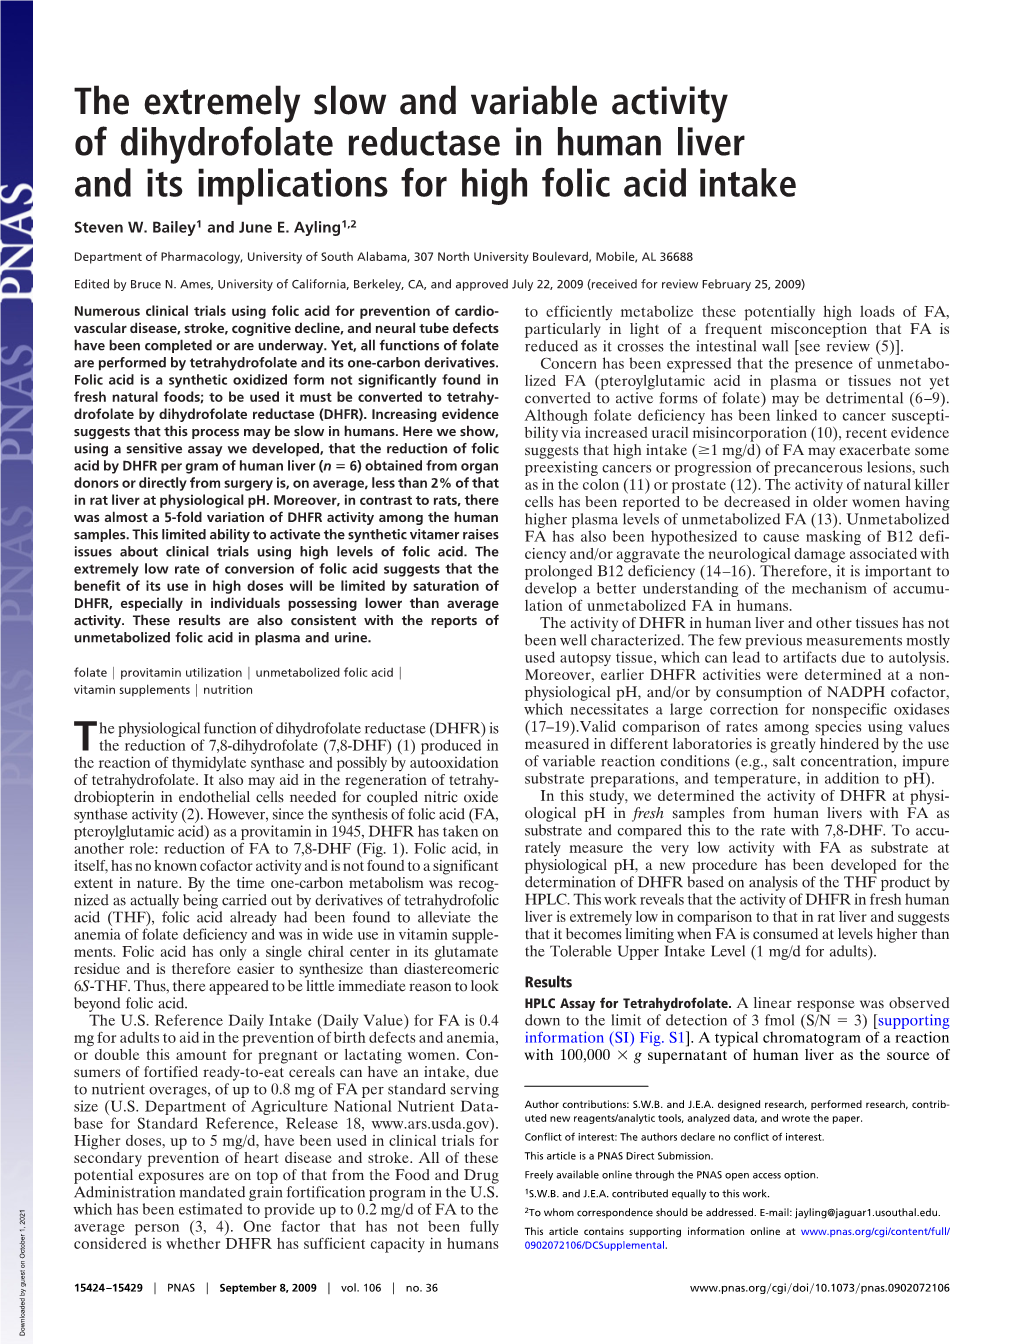 The Extremely Slow and Variable Activity of Dihydrofolate Reductase in Human Liver and Its Implications for High Folic Acid Intake